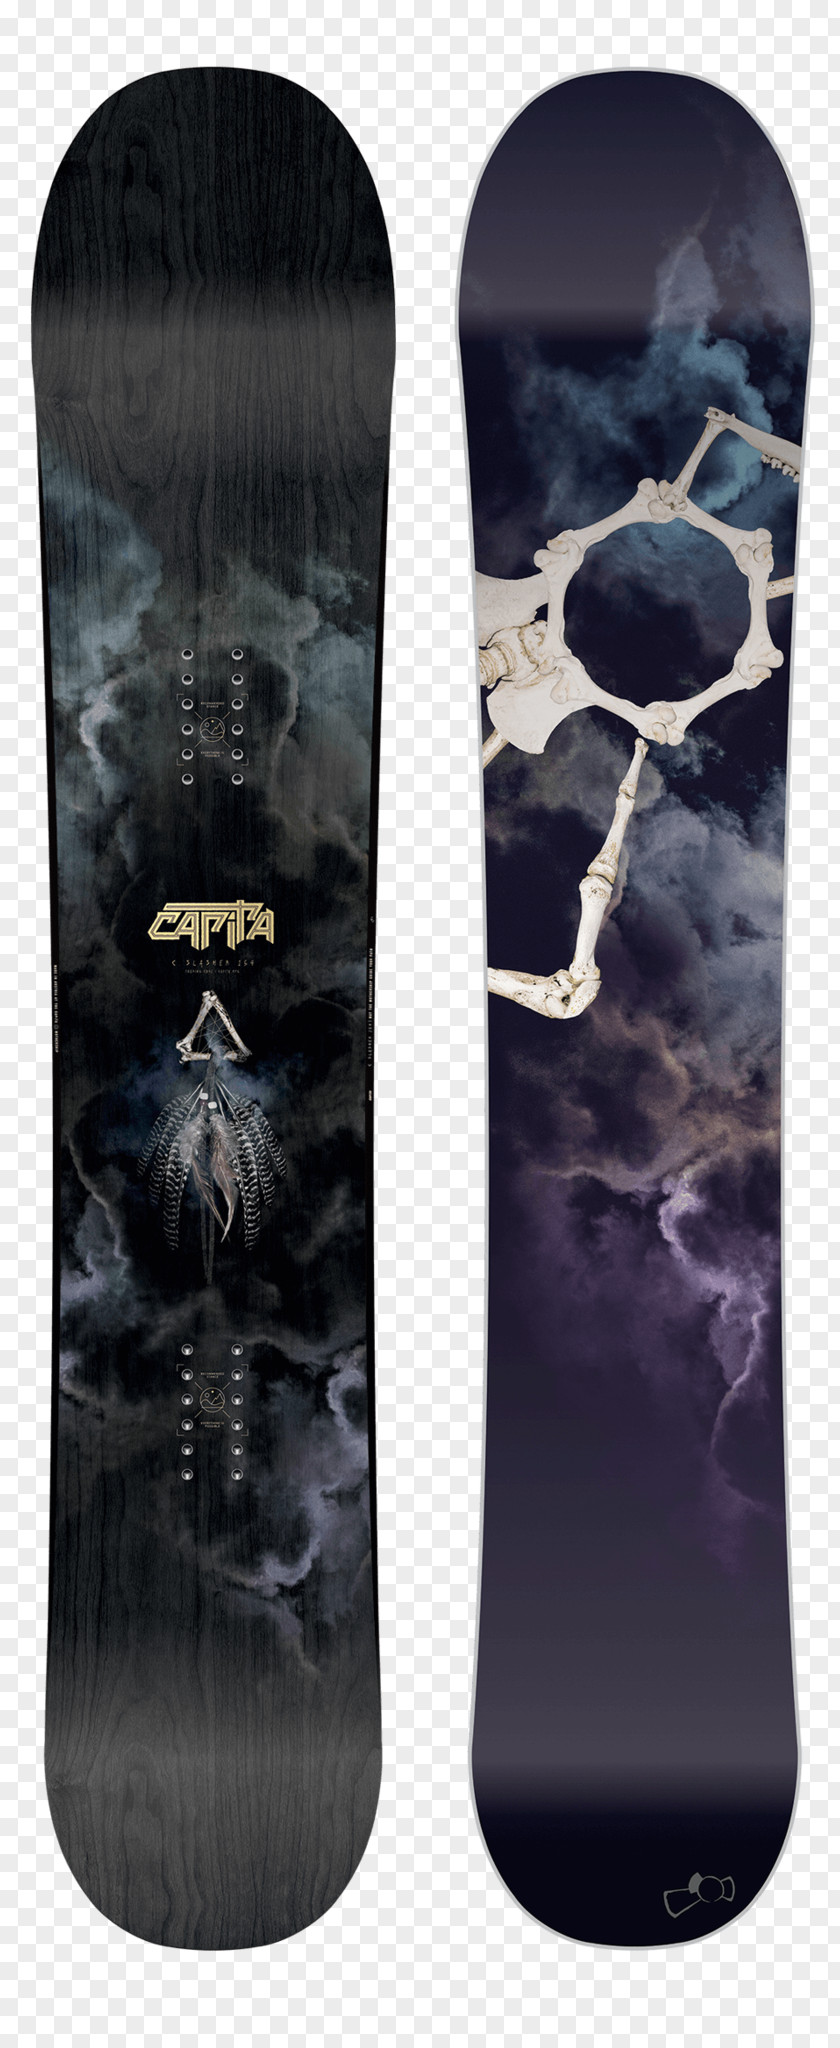 Snowboard Capita Bohle Freeriding Backcountry Skiing PNG